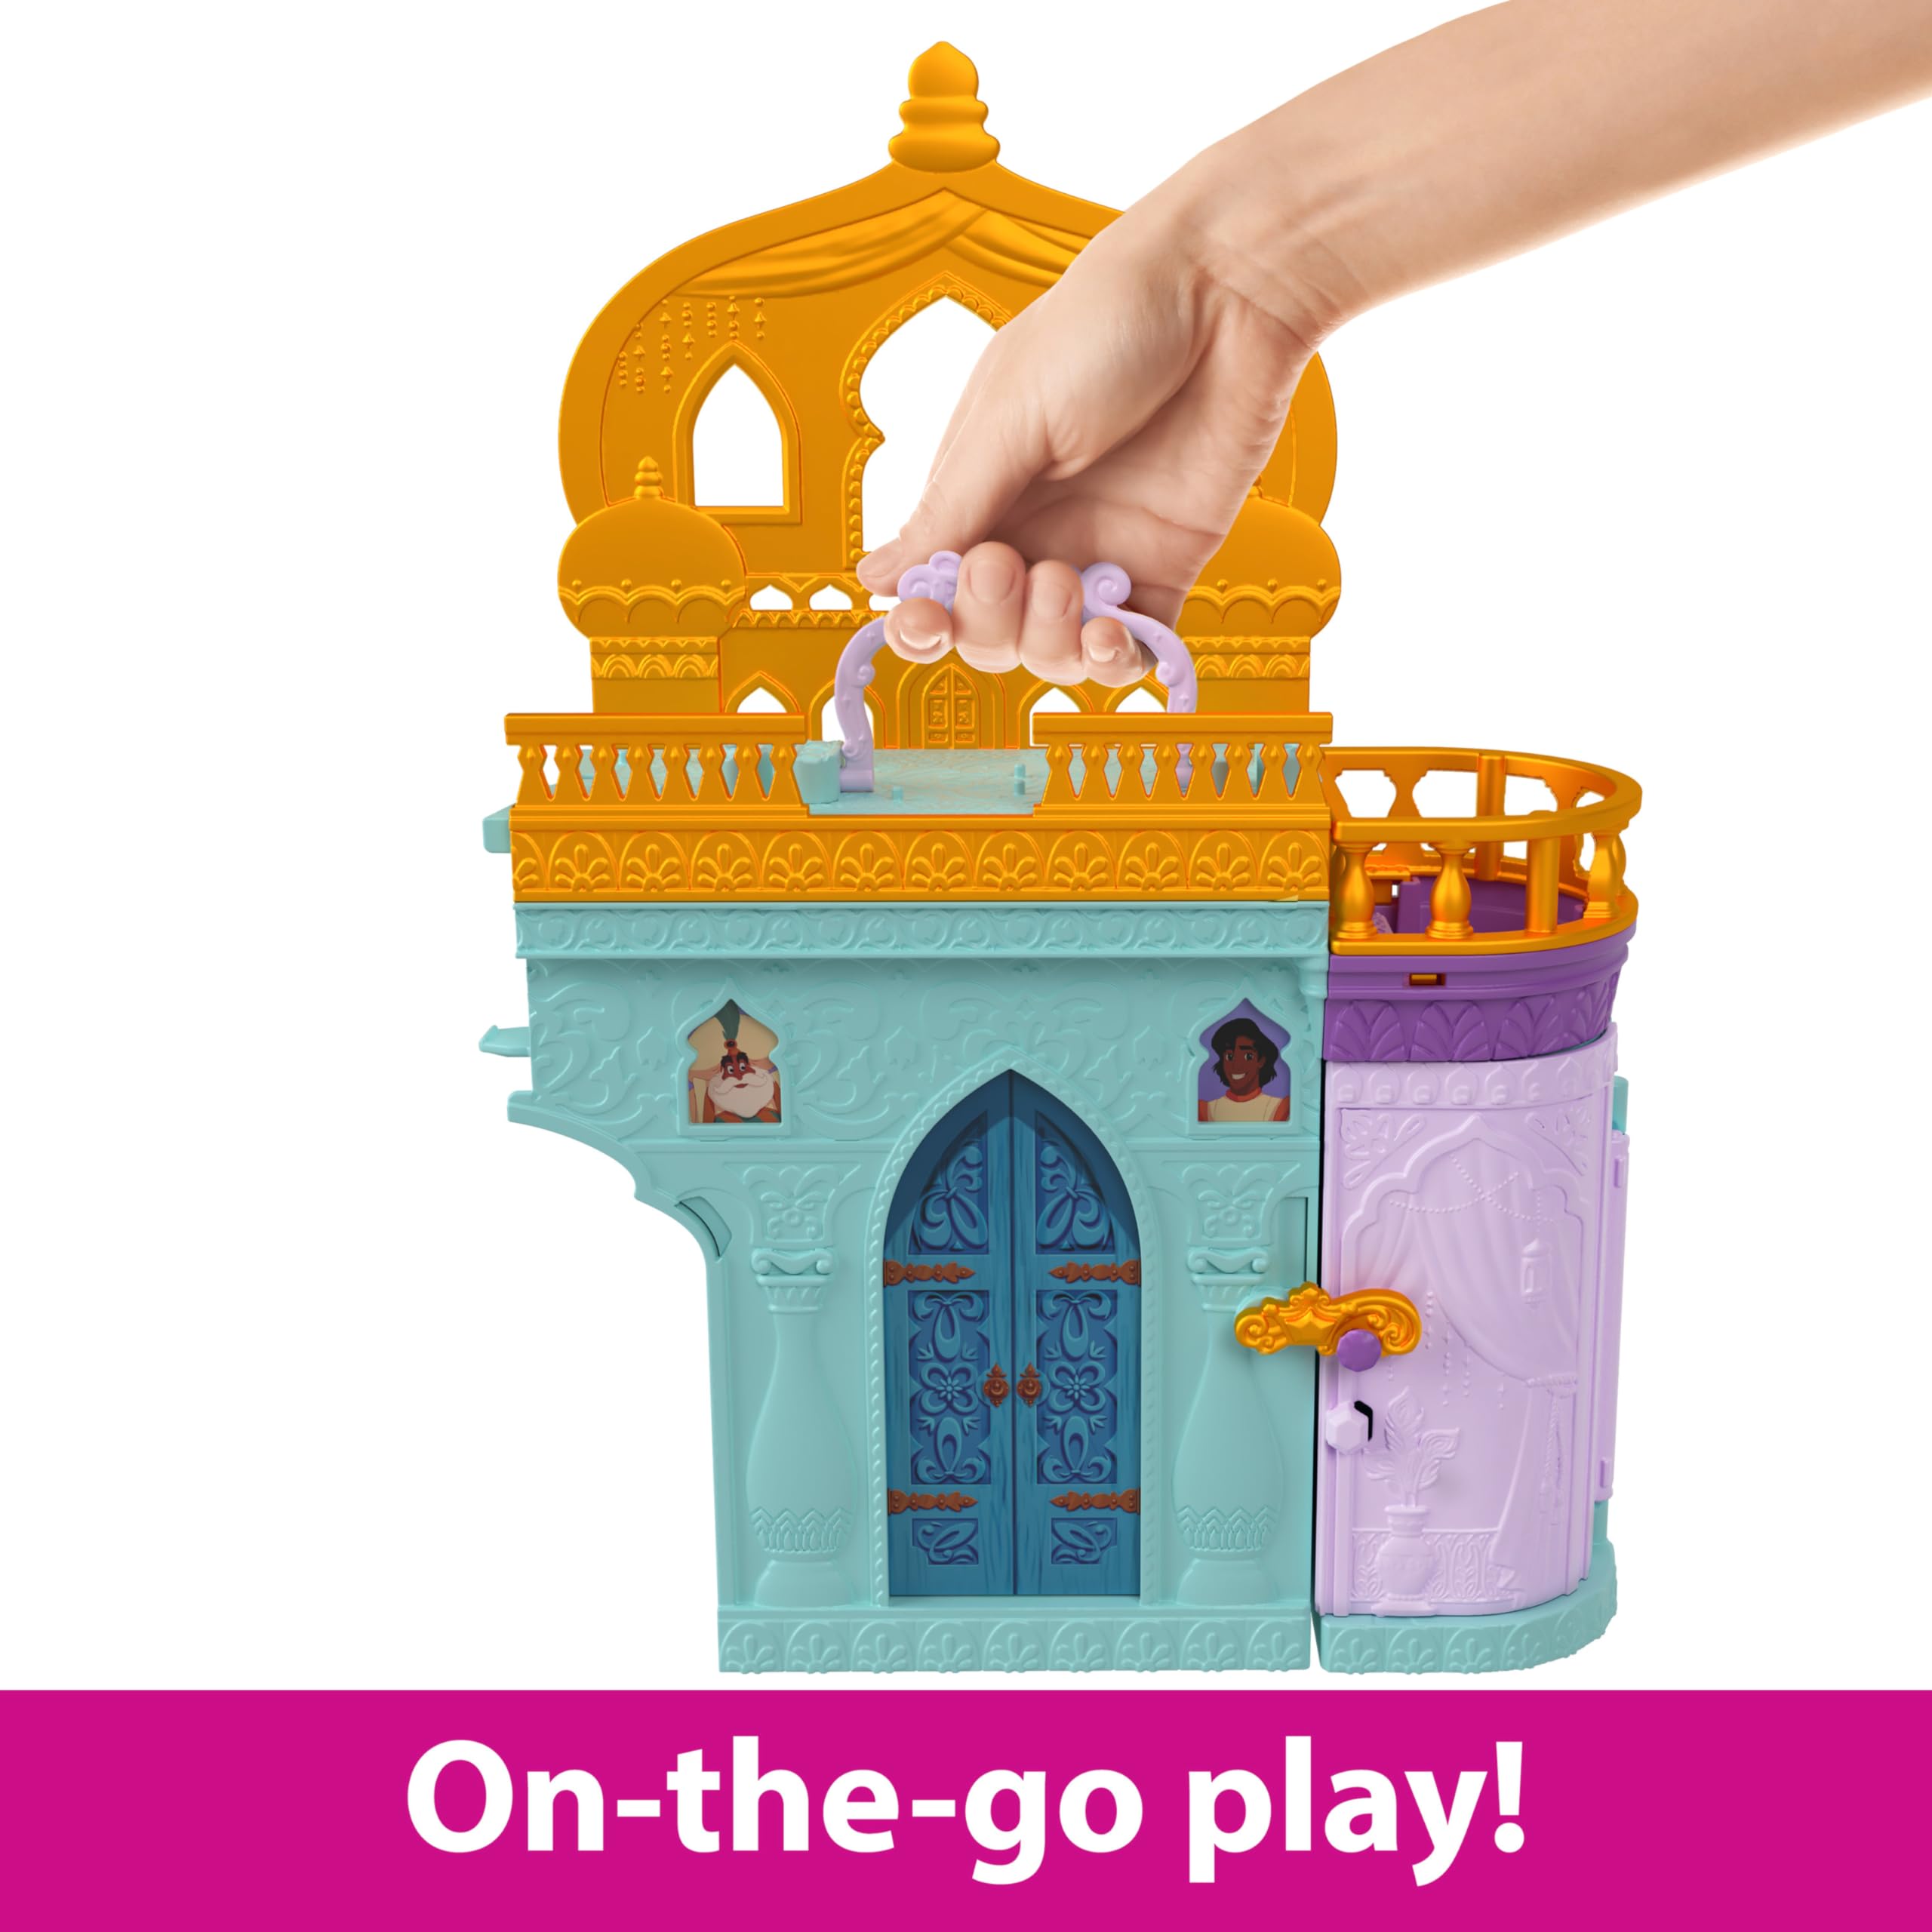 Mattel Disney Princess Jasmine Stackable Castle Doll House Playset with Small Doll, 2 Friends & 7 Pieces, Inspired by Disney Movie Aladdin